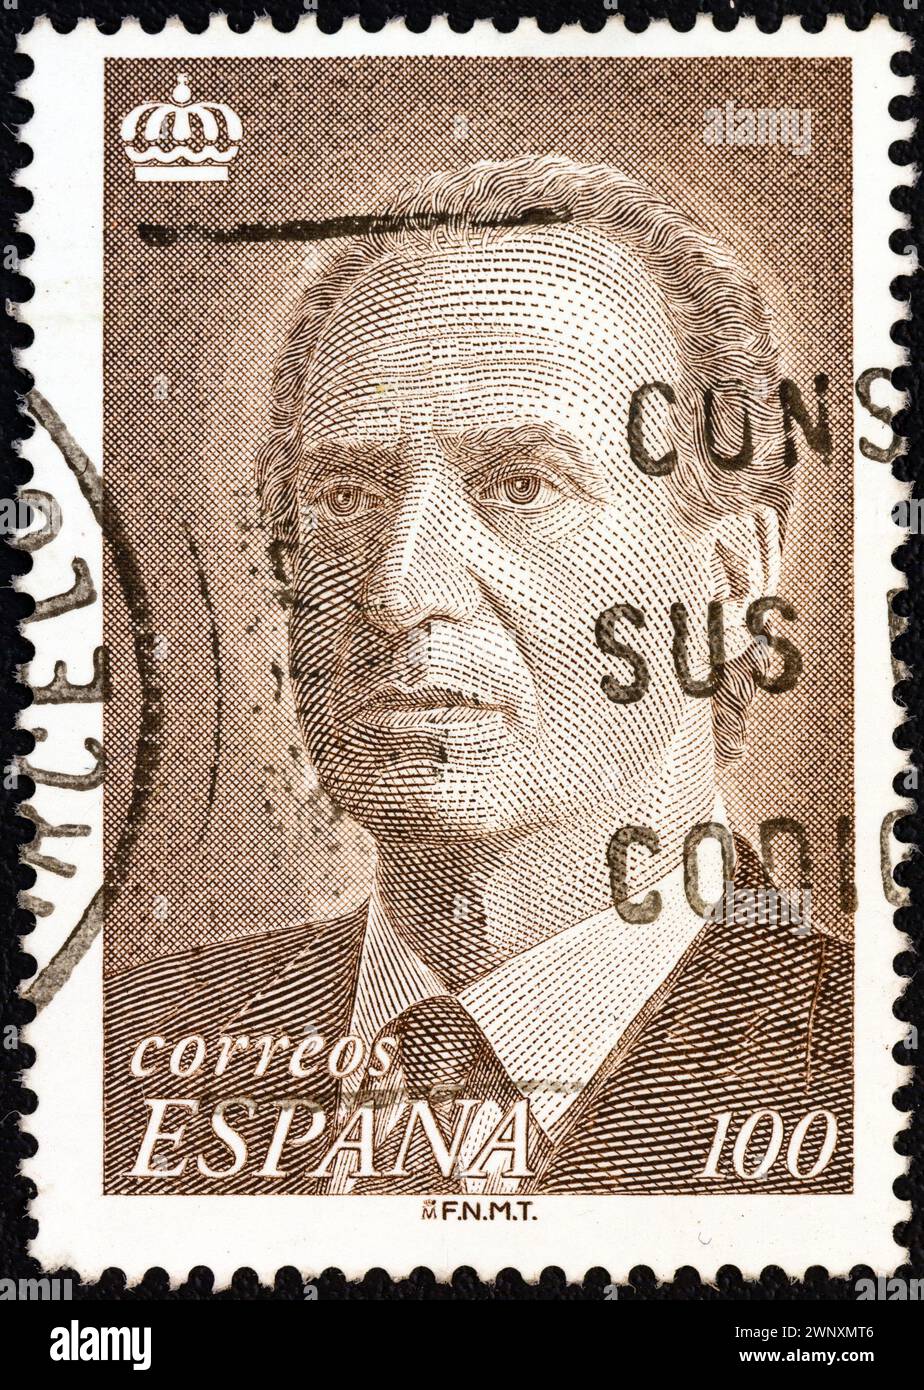 SPAIN - CIRCA 1996: A stamp printed in Spain shows a portrait of King Juan Carlos I Stock Photo